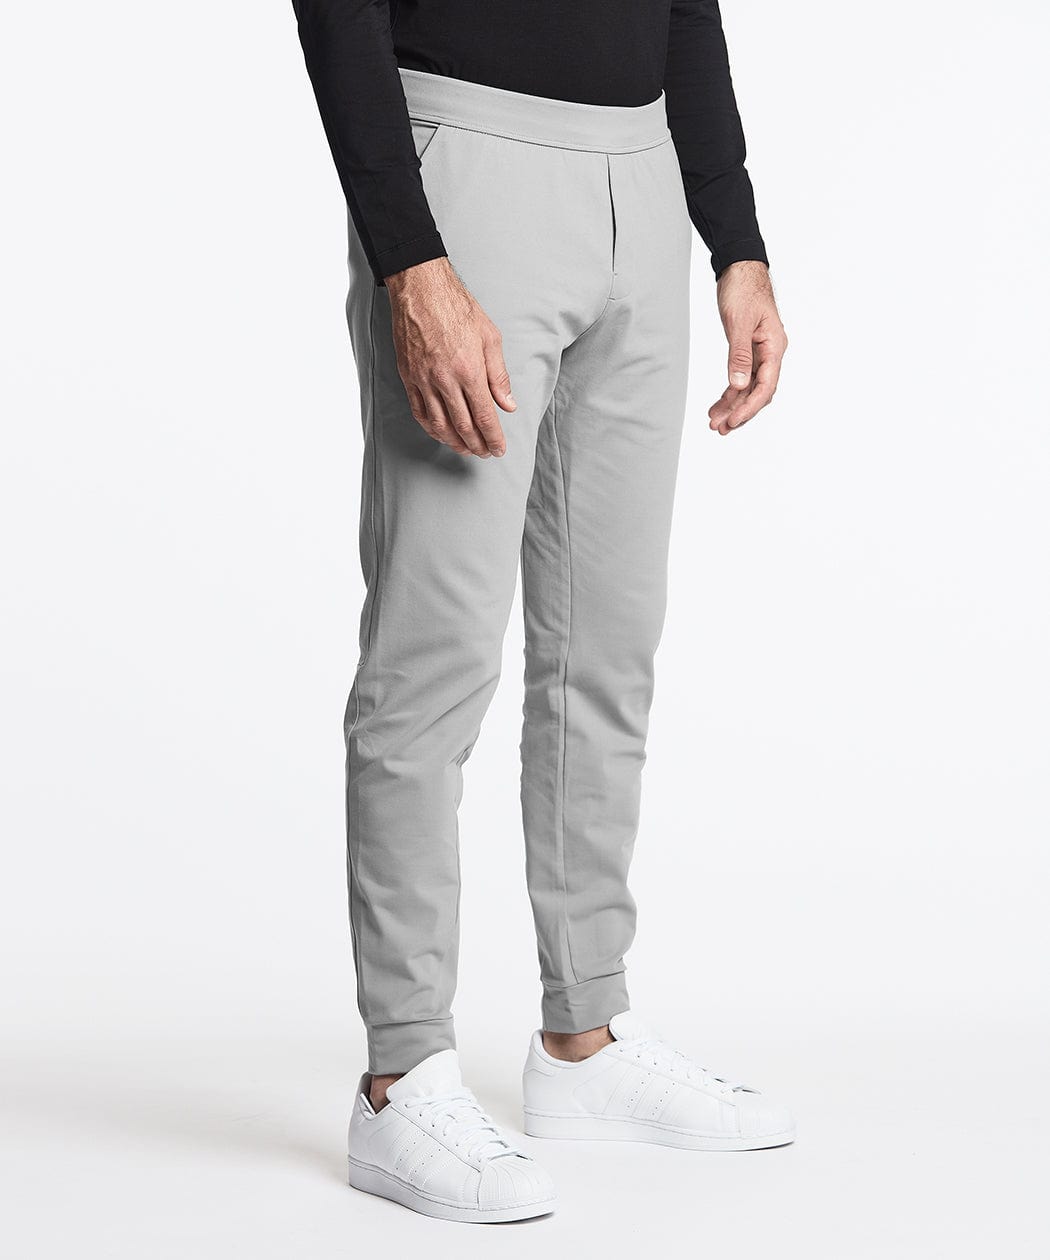 public rec all day every day pant review